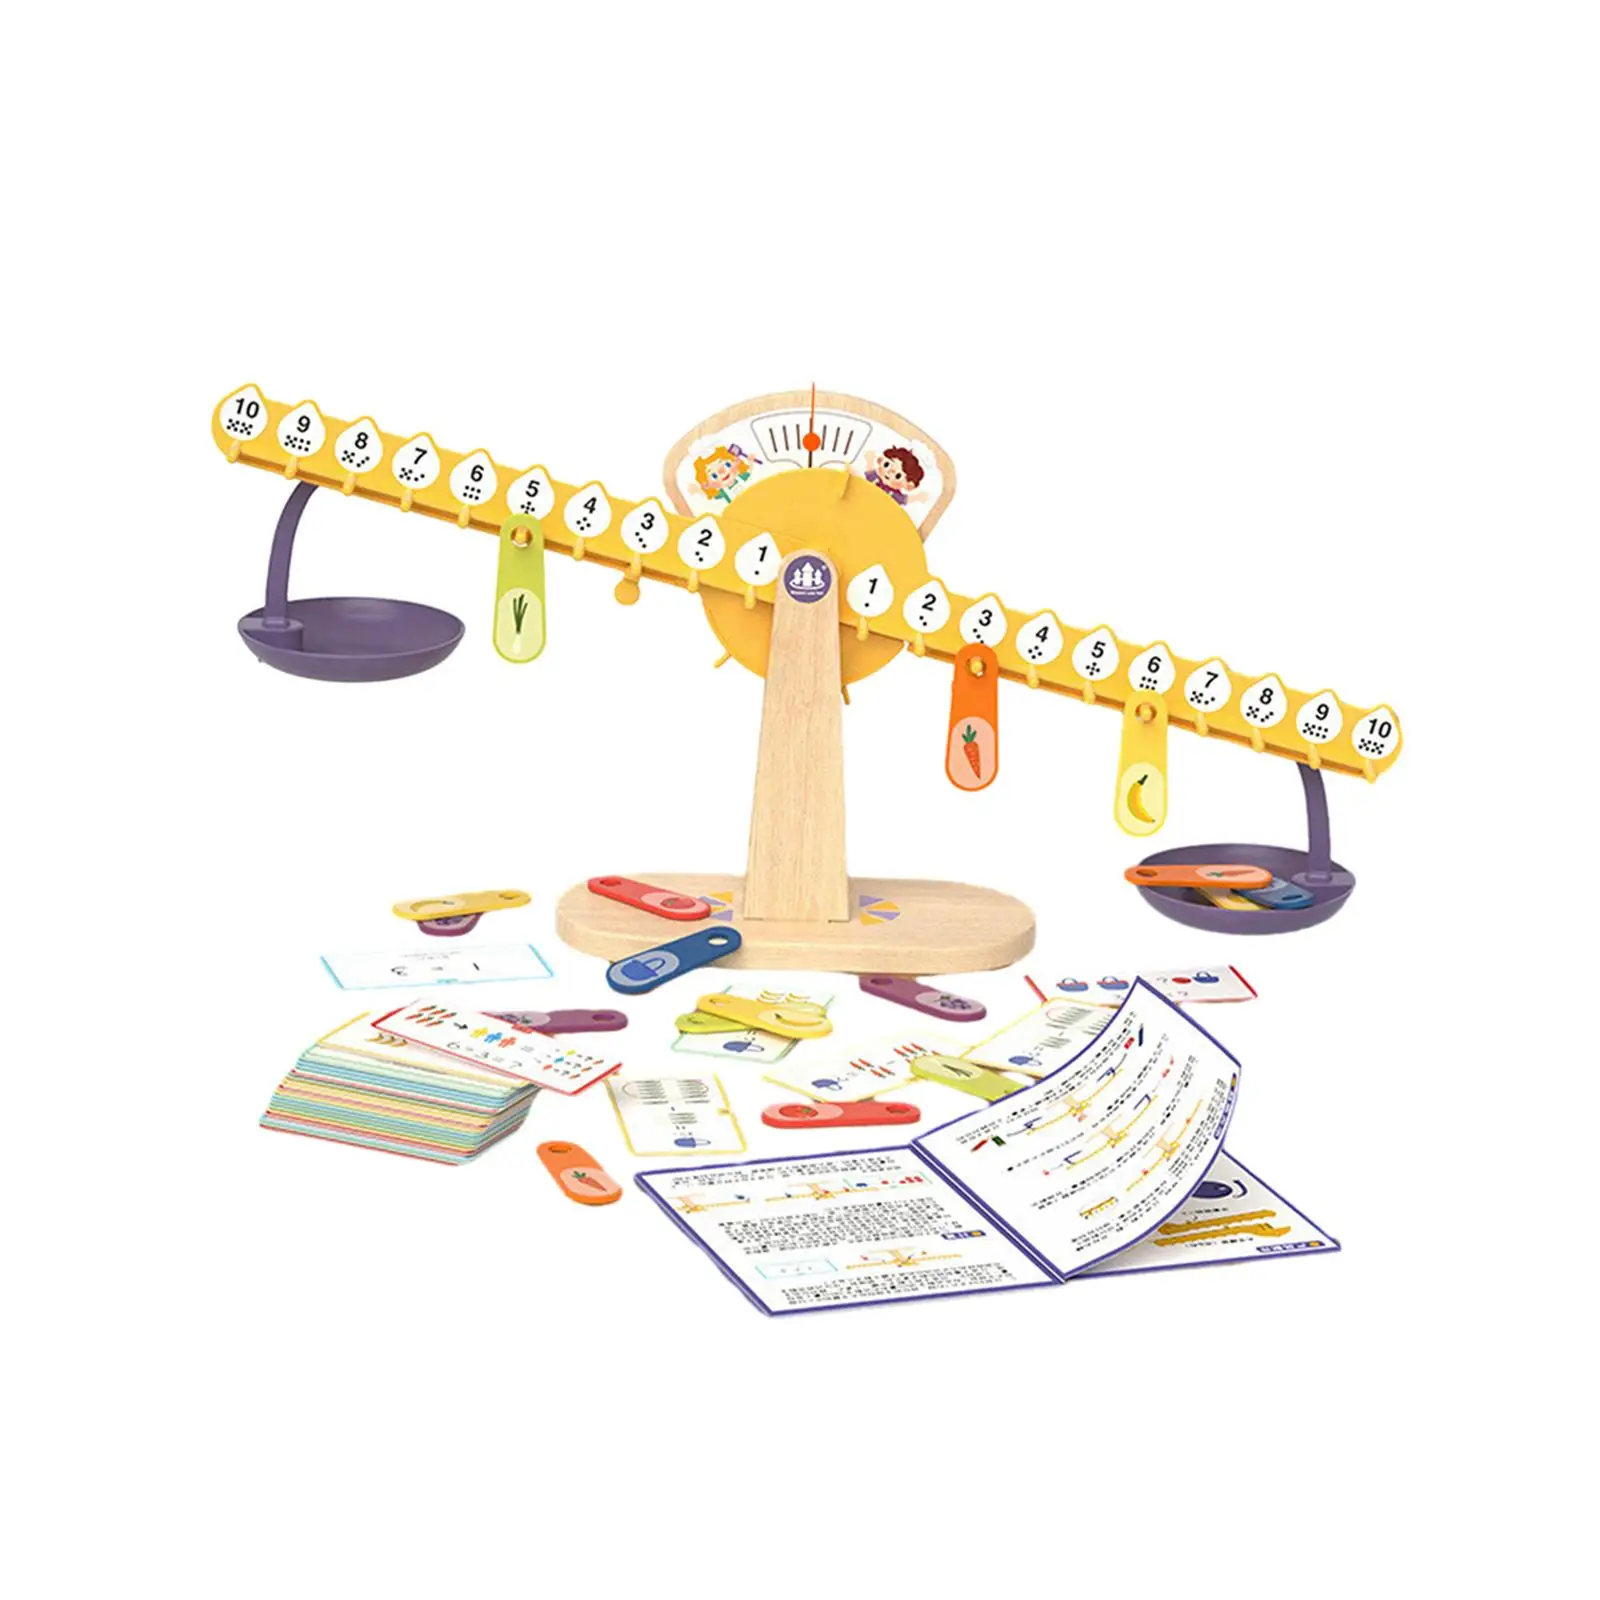 Kids Balance Scale Montessori Toy Boards Game, Educational for Early Math and Number Concepts for Kids Boy and Girl,